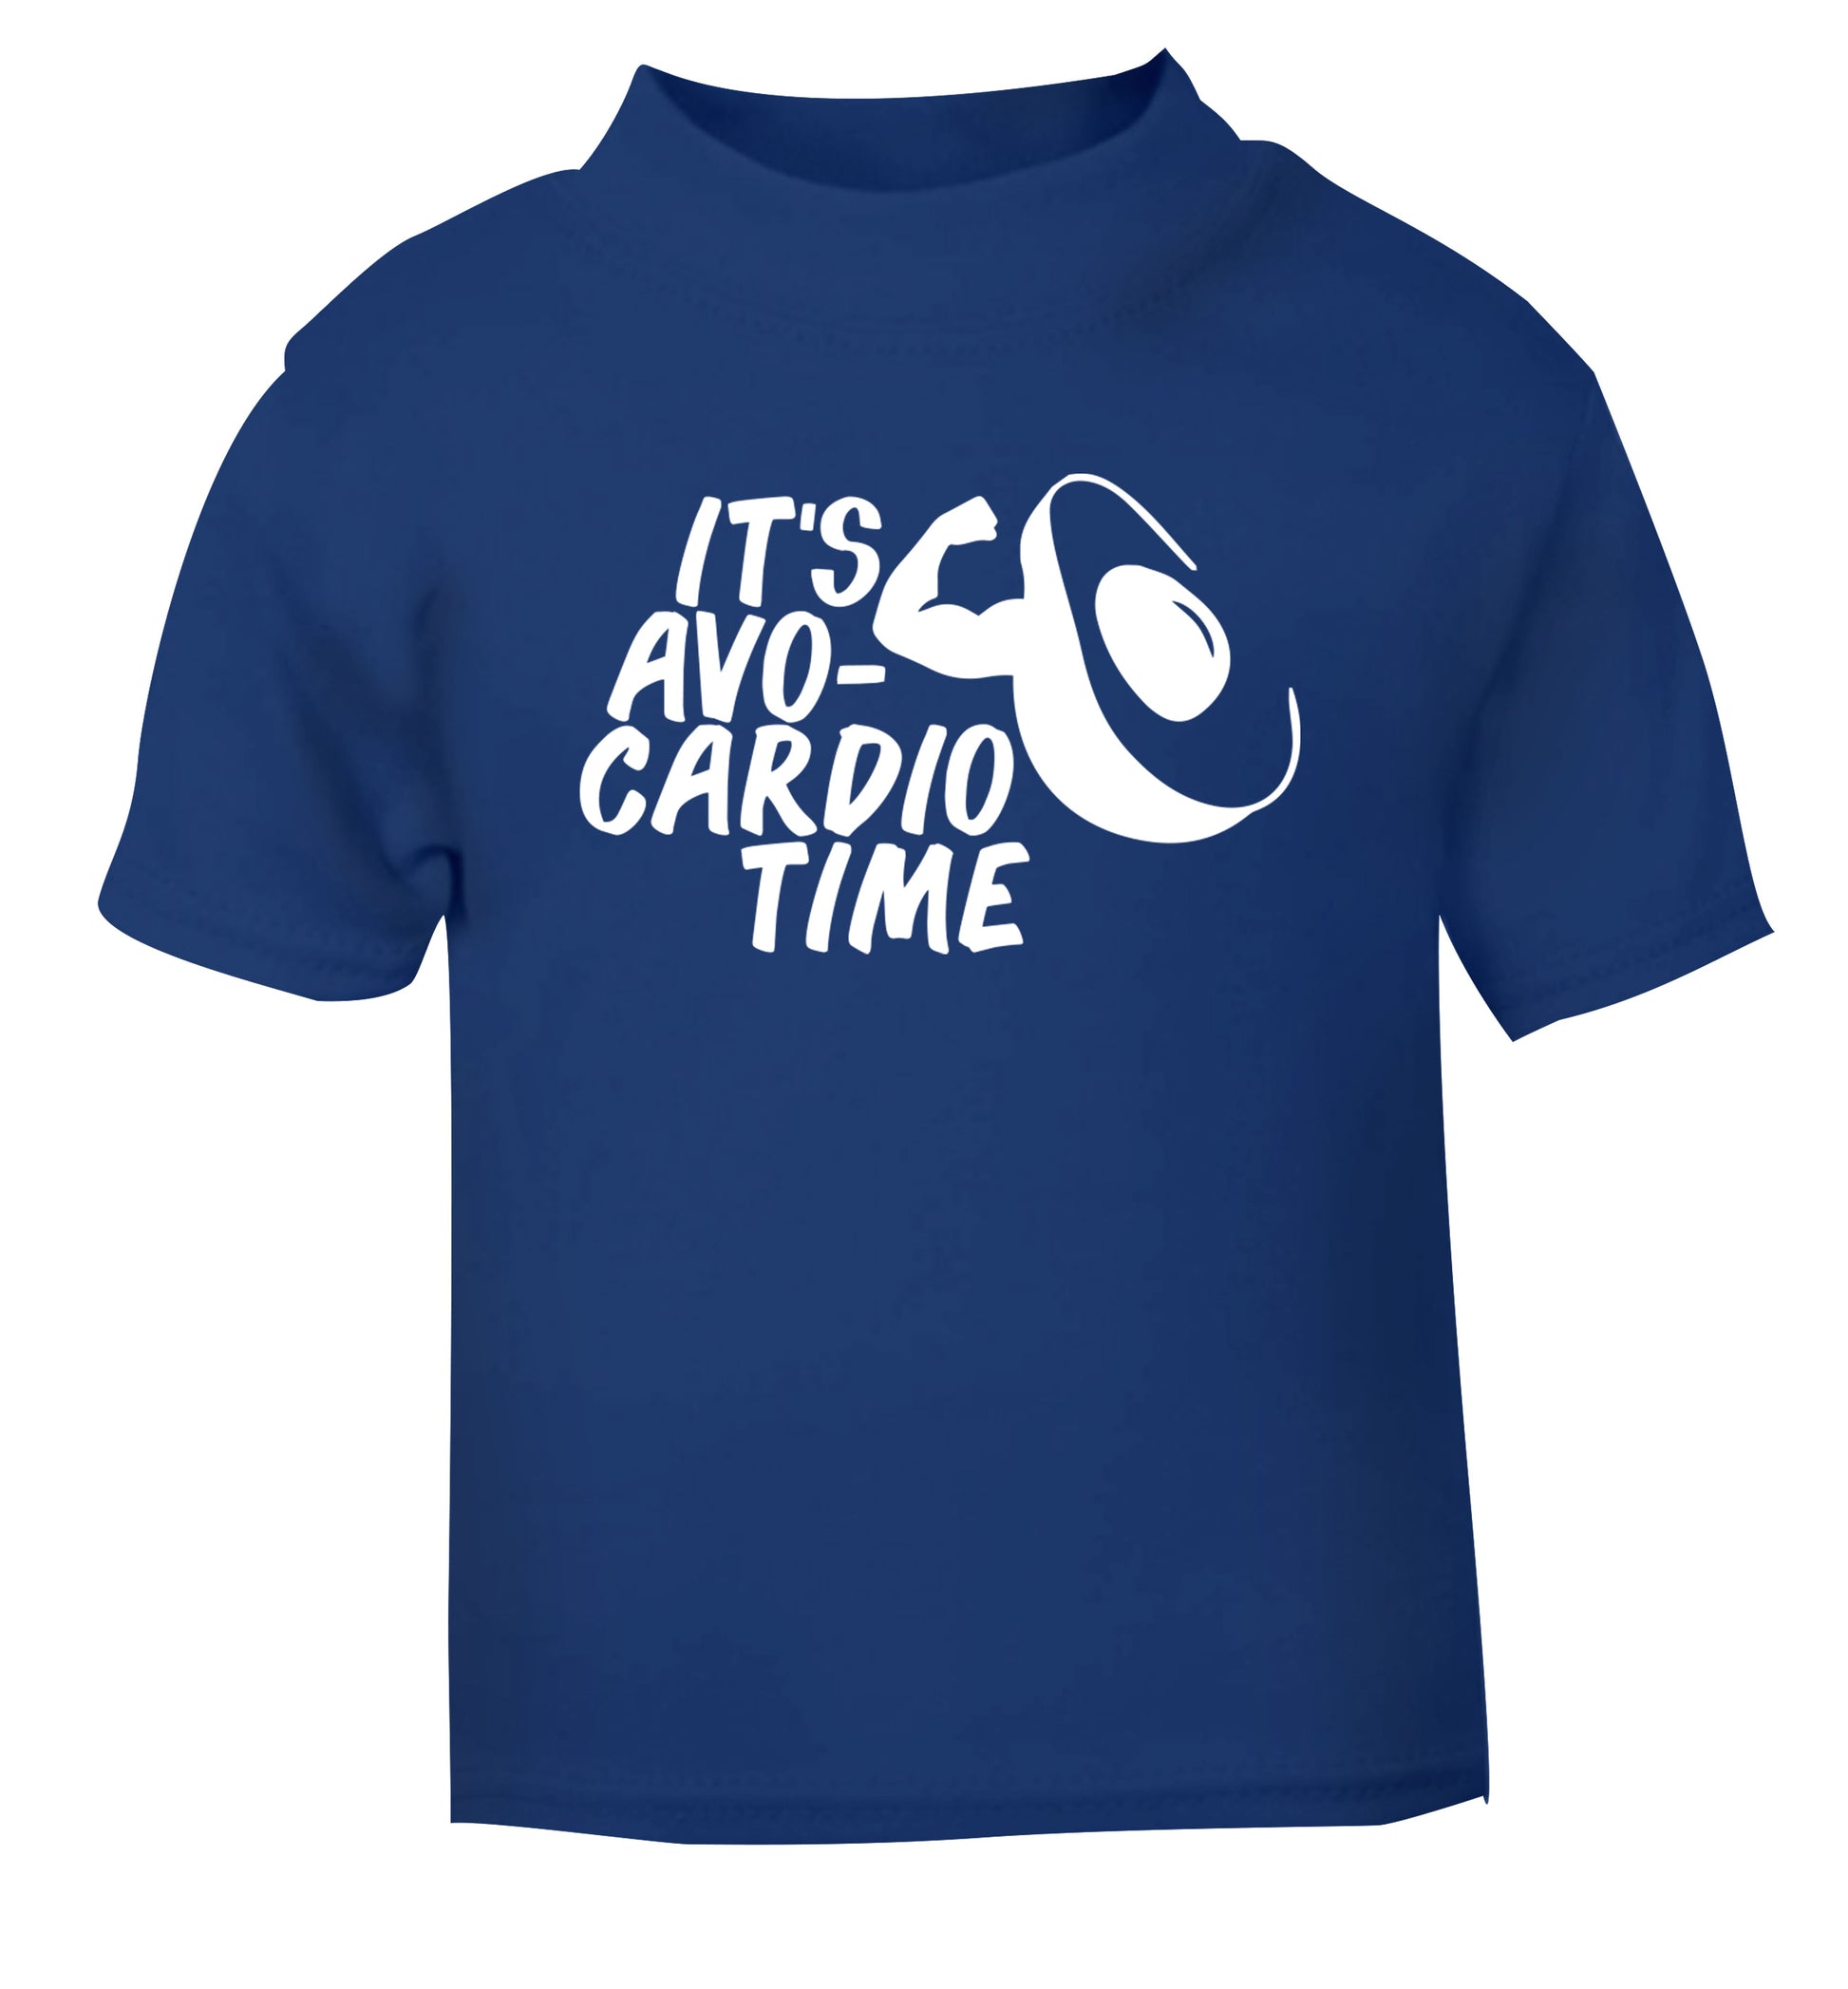 It's avo-cardio time blue Baby Toddler Tshirt 2 Years